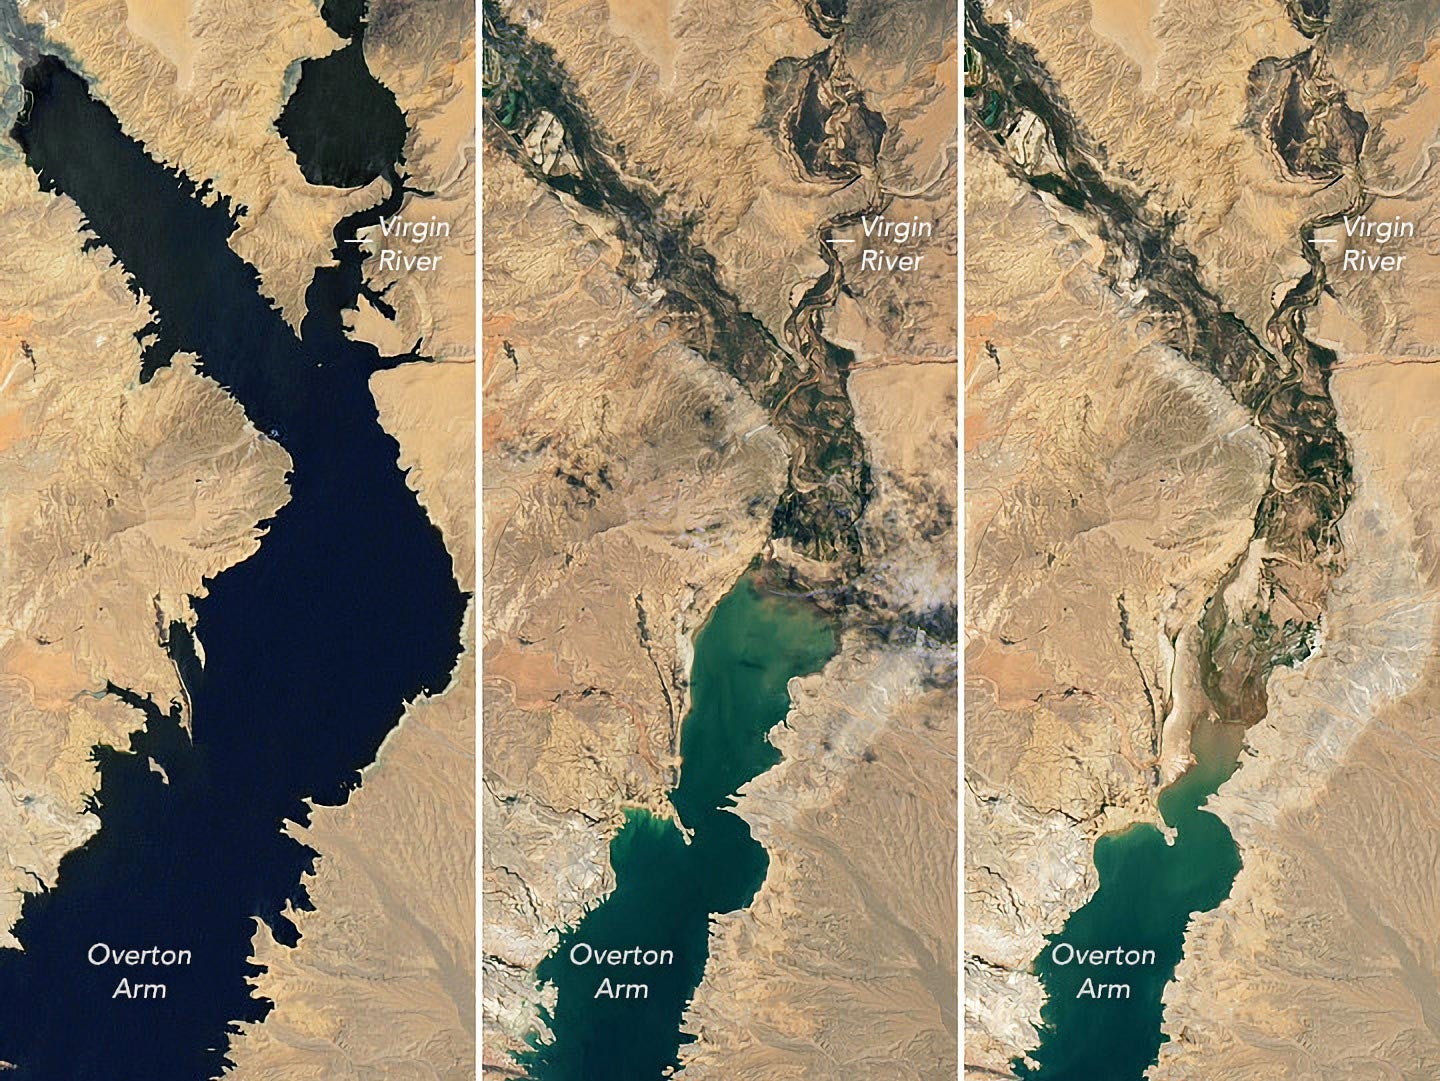 Images from 2020, 2021 and 2022 of Lake Mead taken by Nasa’s Landsat satellites